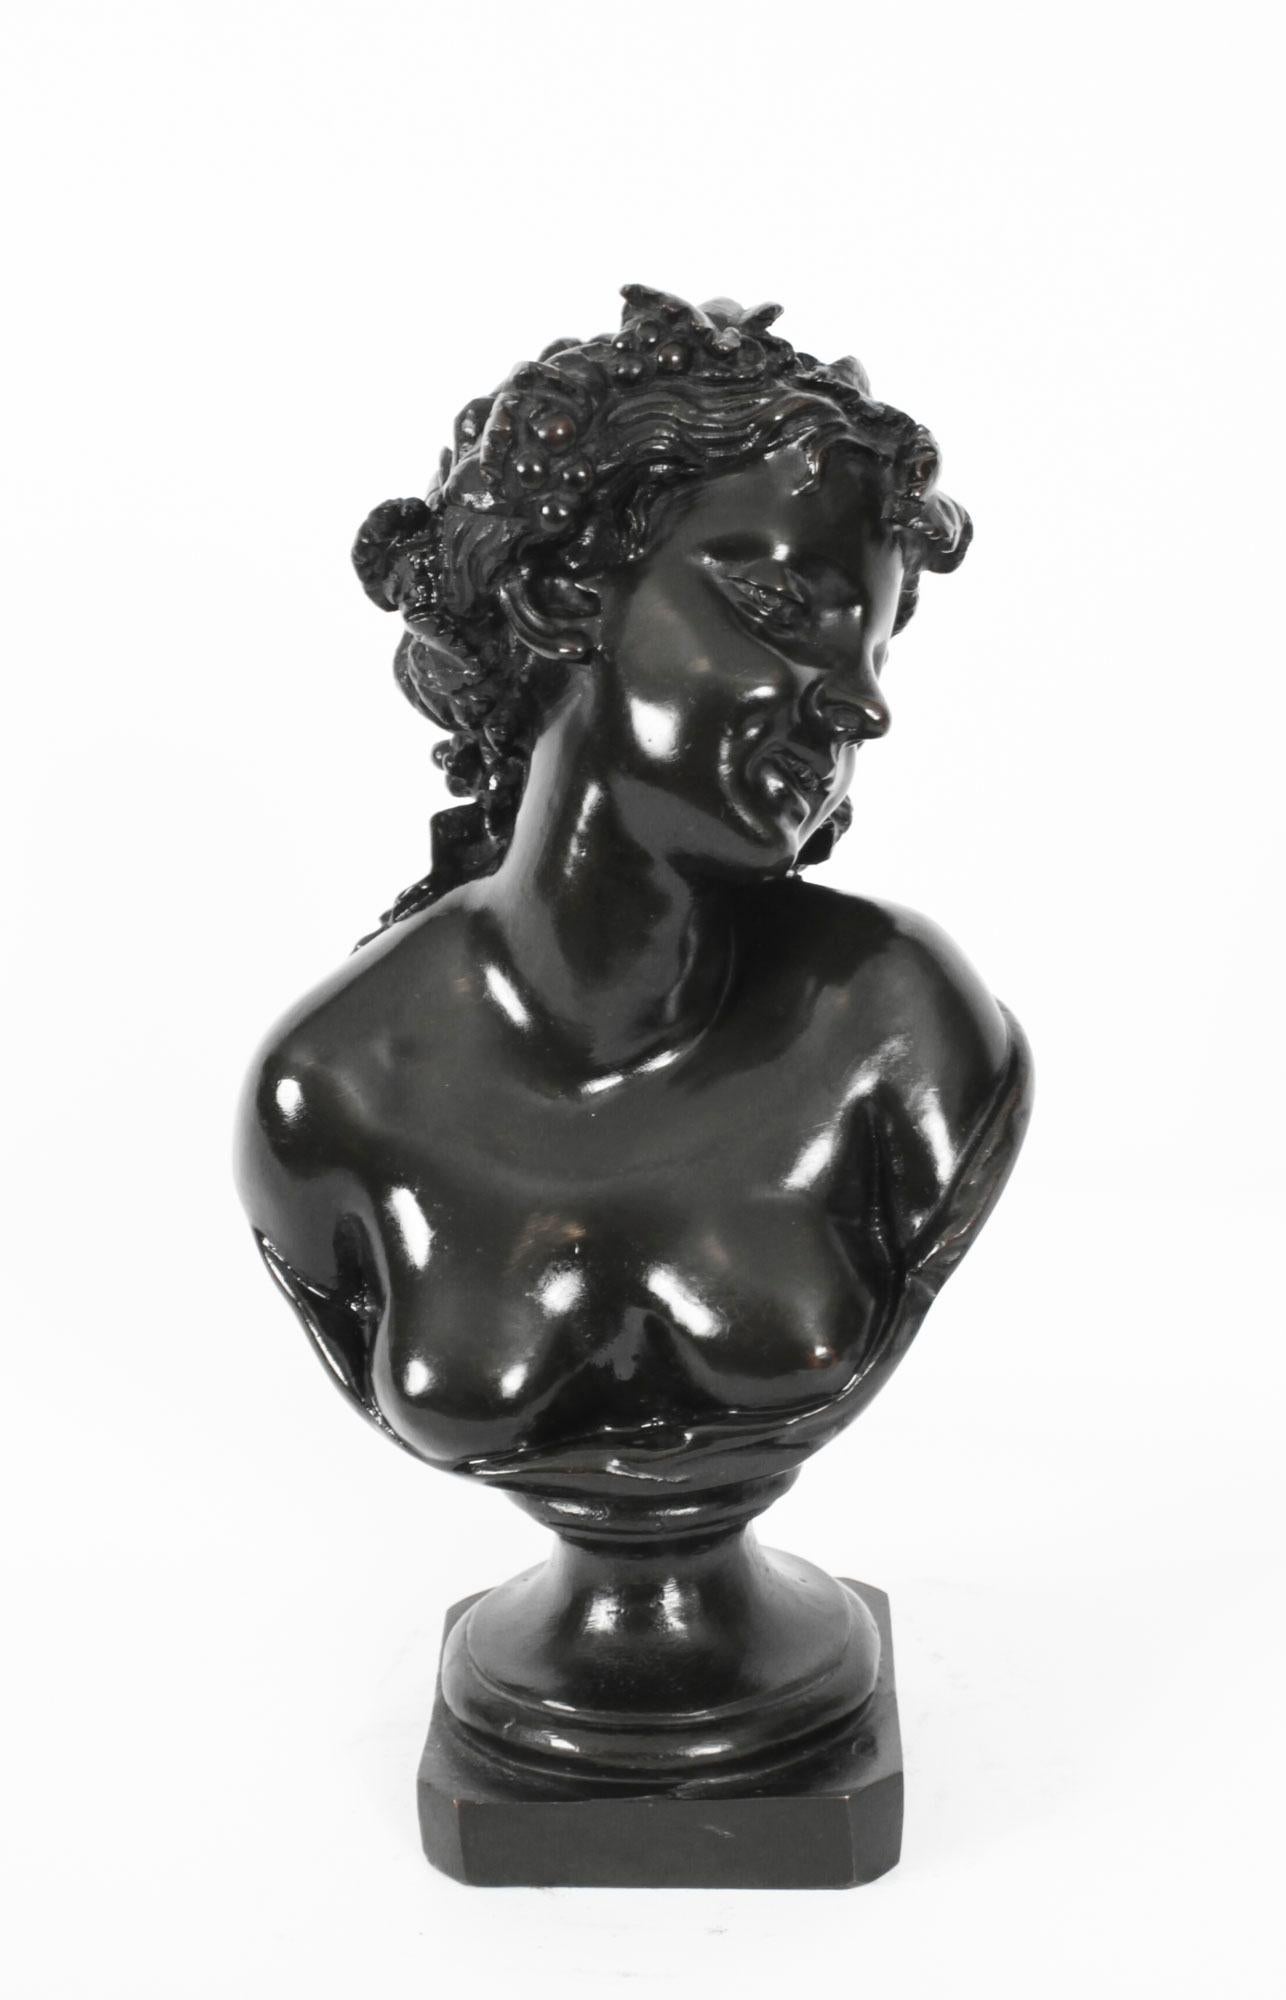 This is a fine antique pair of Italian Grand Tour solid bronze busts of Dionysus and Ariadne by Clodion, and bearing his signature, dating from the late 18th century.
 
The pair feature black patinated finely cast busts mounted on stepped and cut